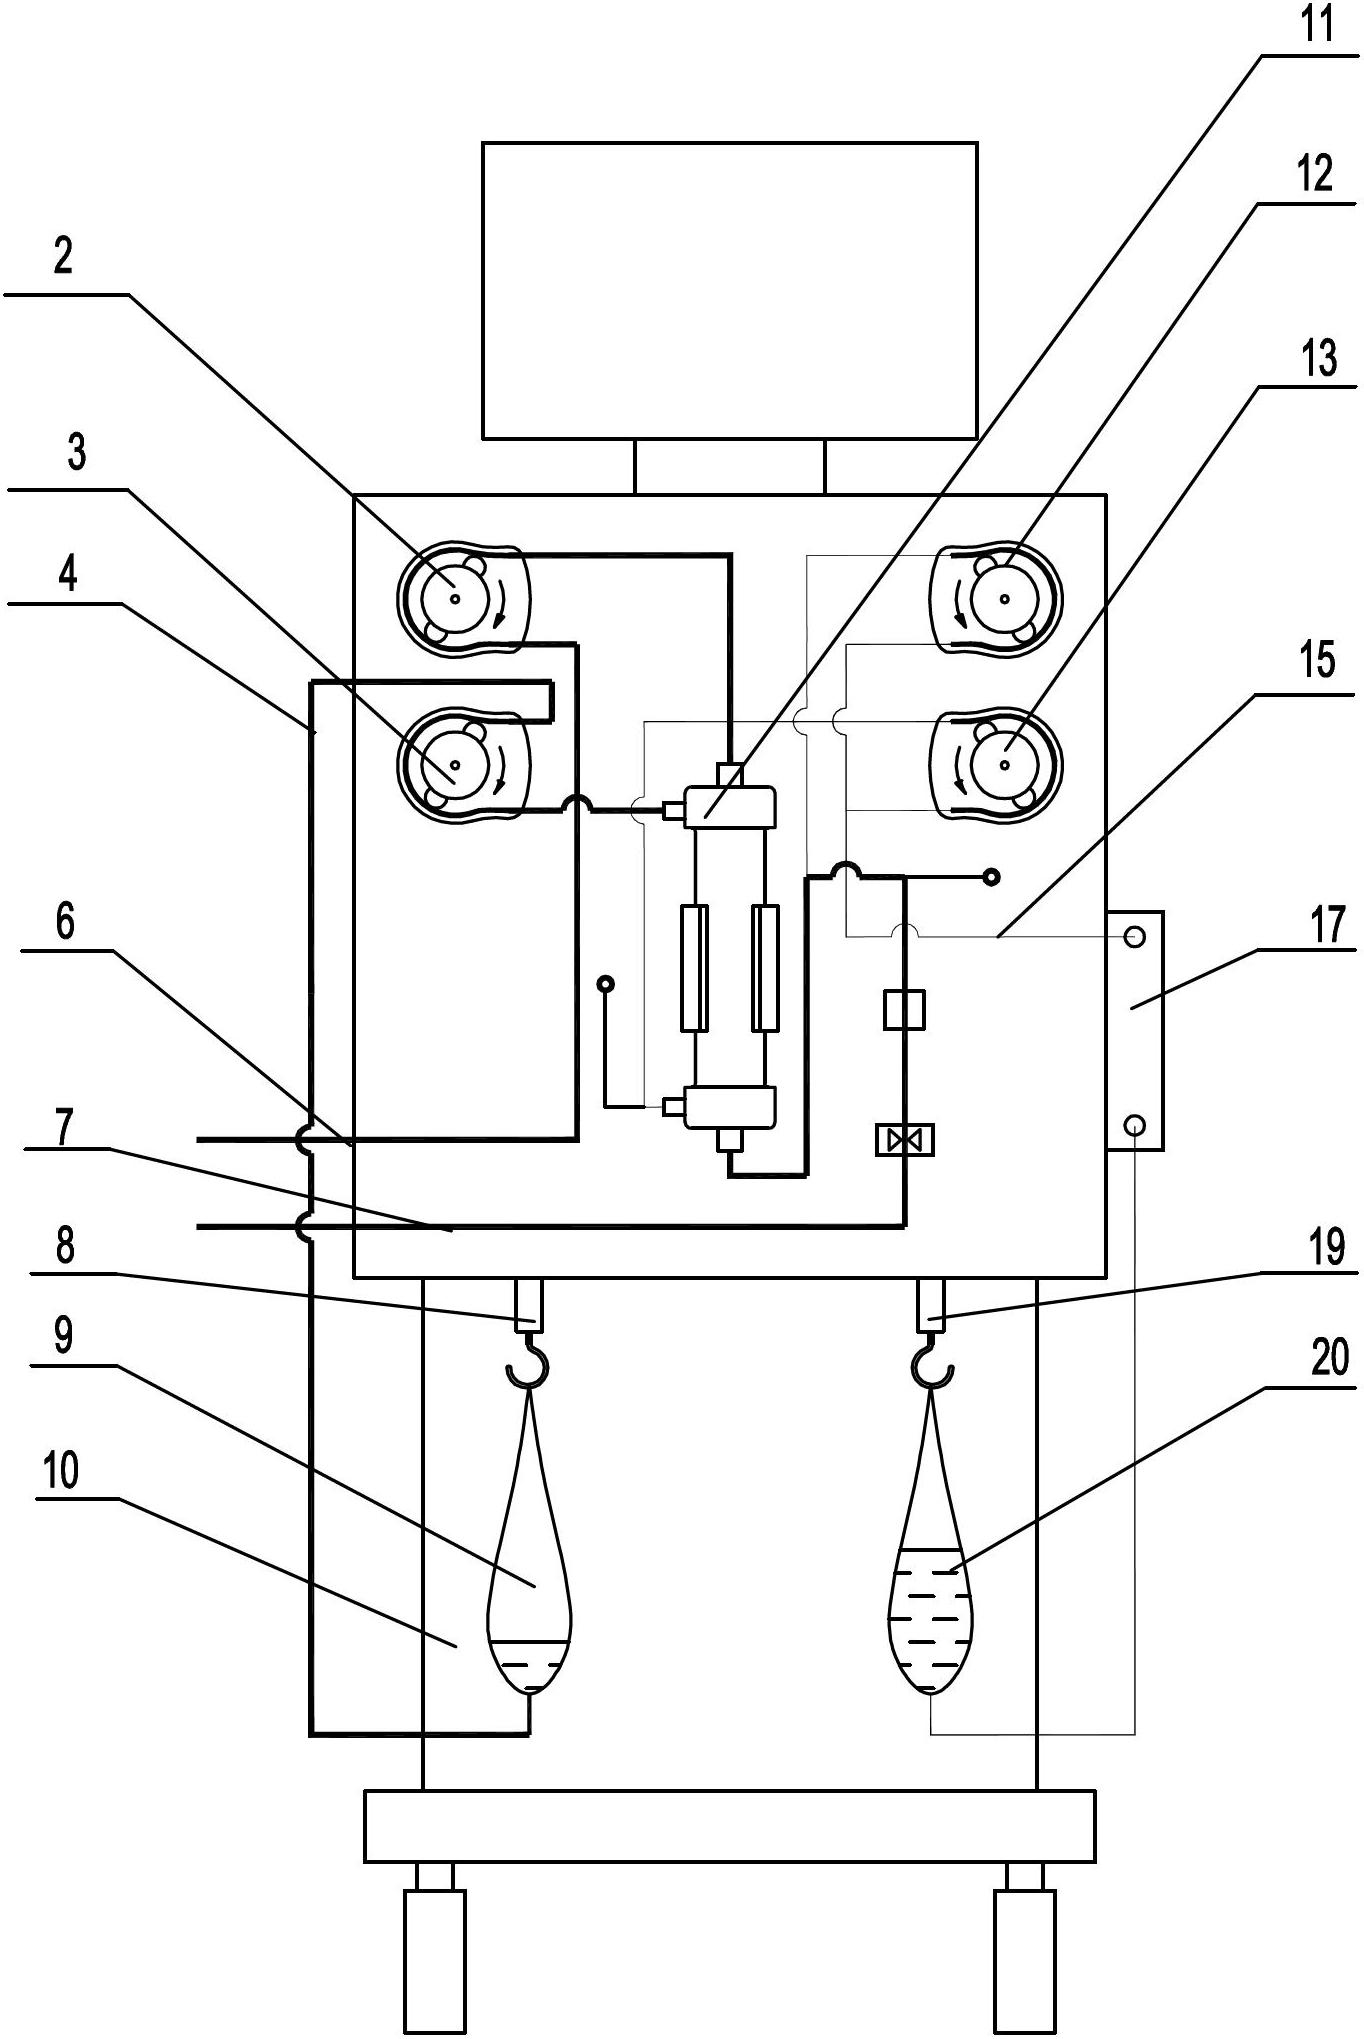 Bedside continuous hemodialysis filtration device